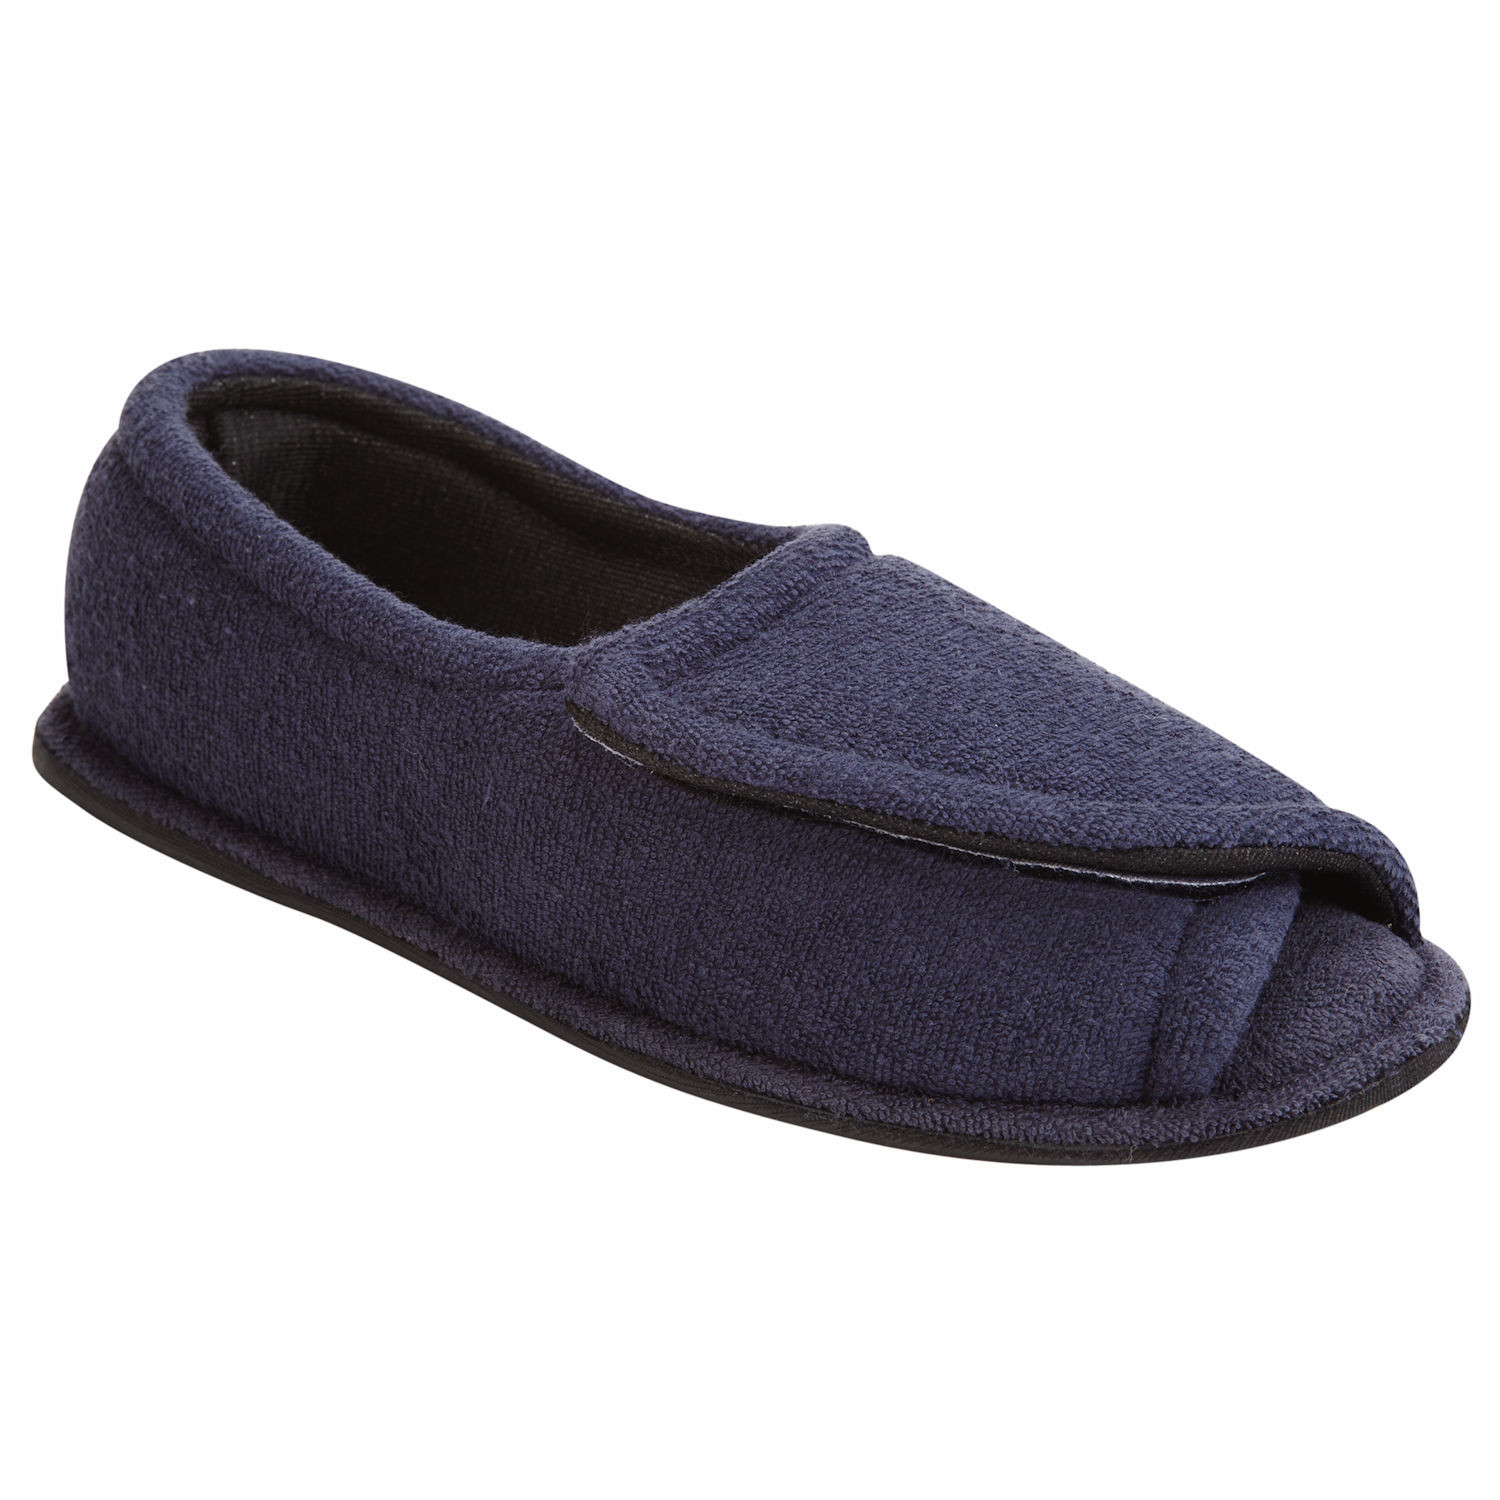 Women's Terry Cloth Slippers - House Shoe Slides | Support Plus